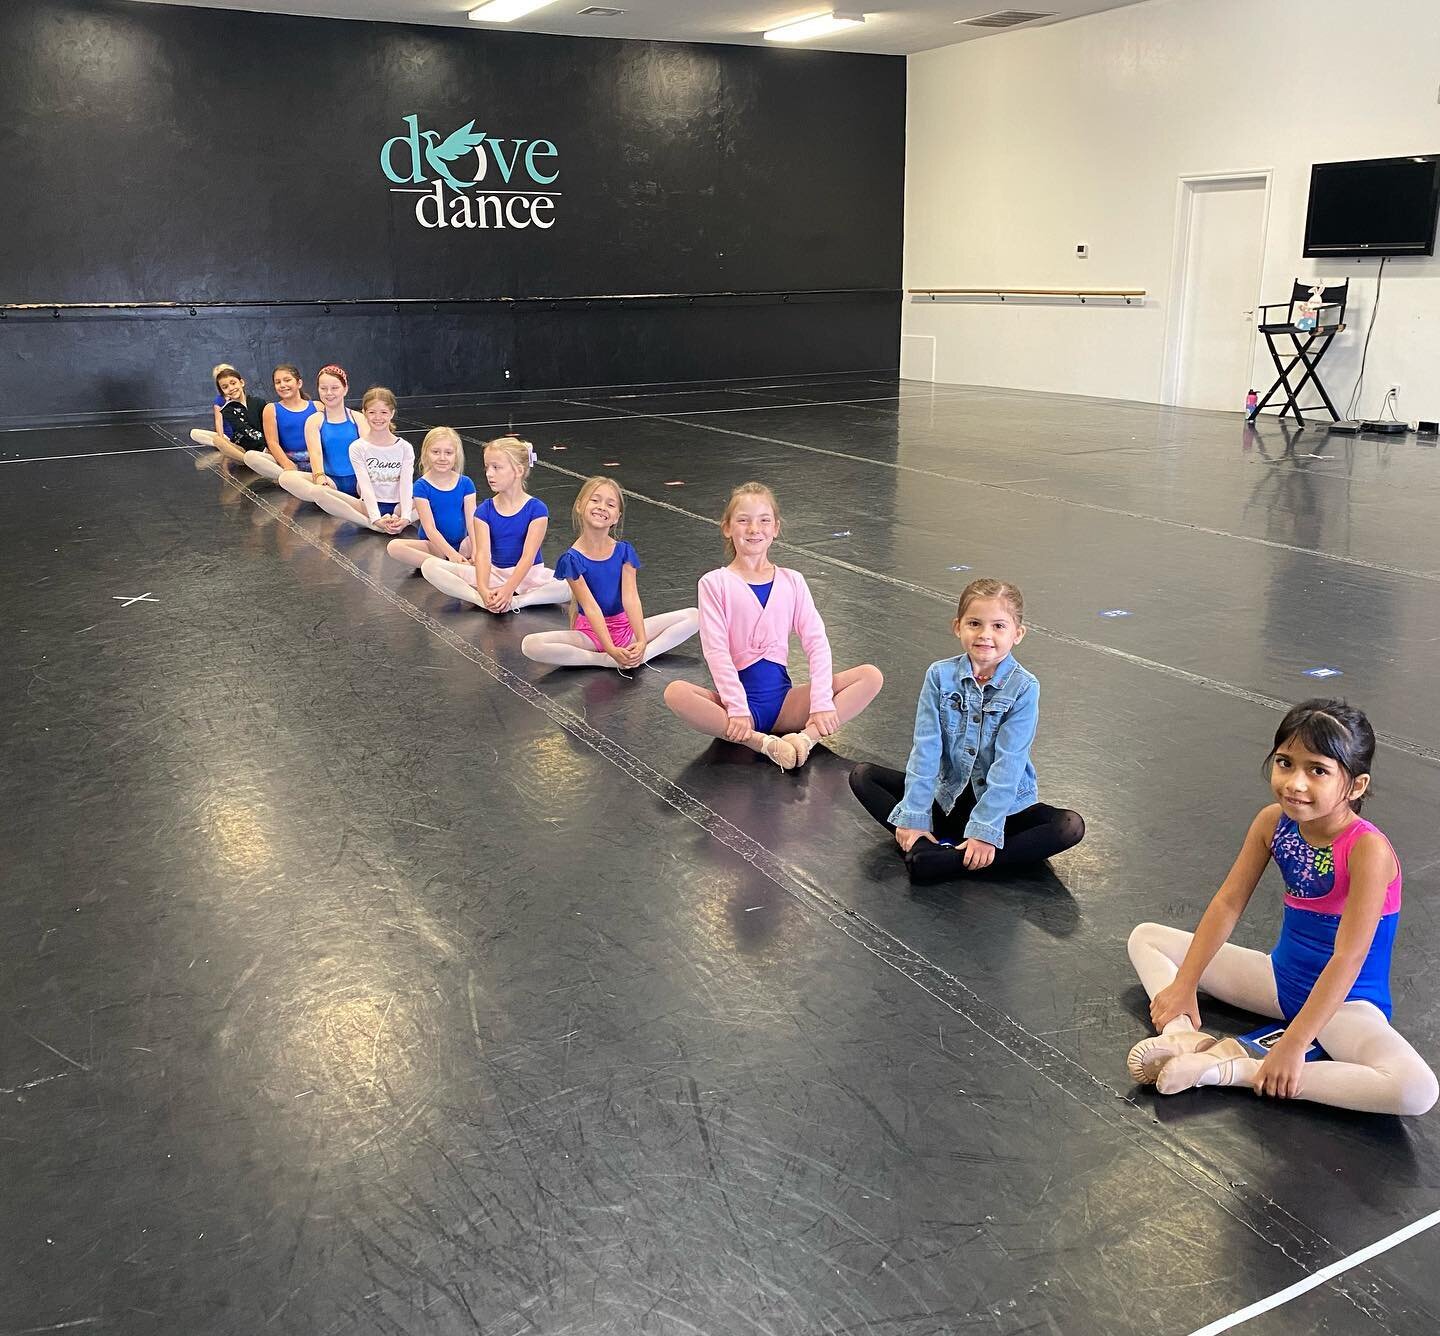 World Ballet Day with some of the cutest Friday ballerinas there are! 🤍